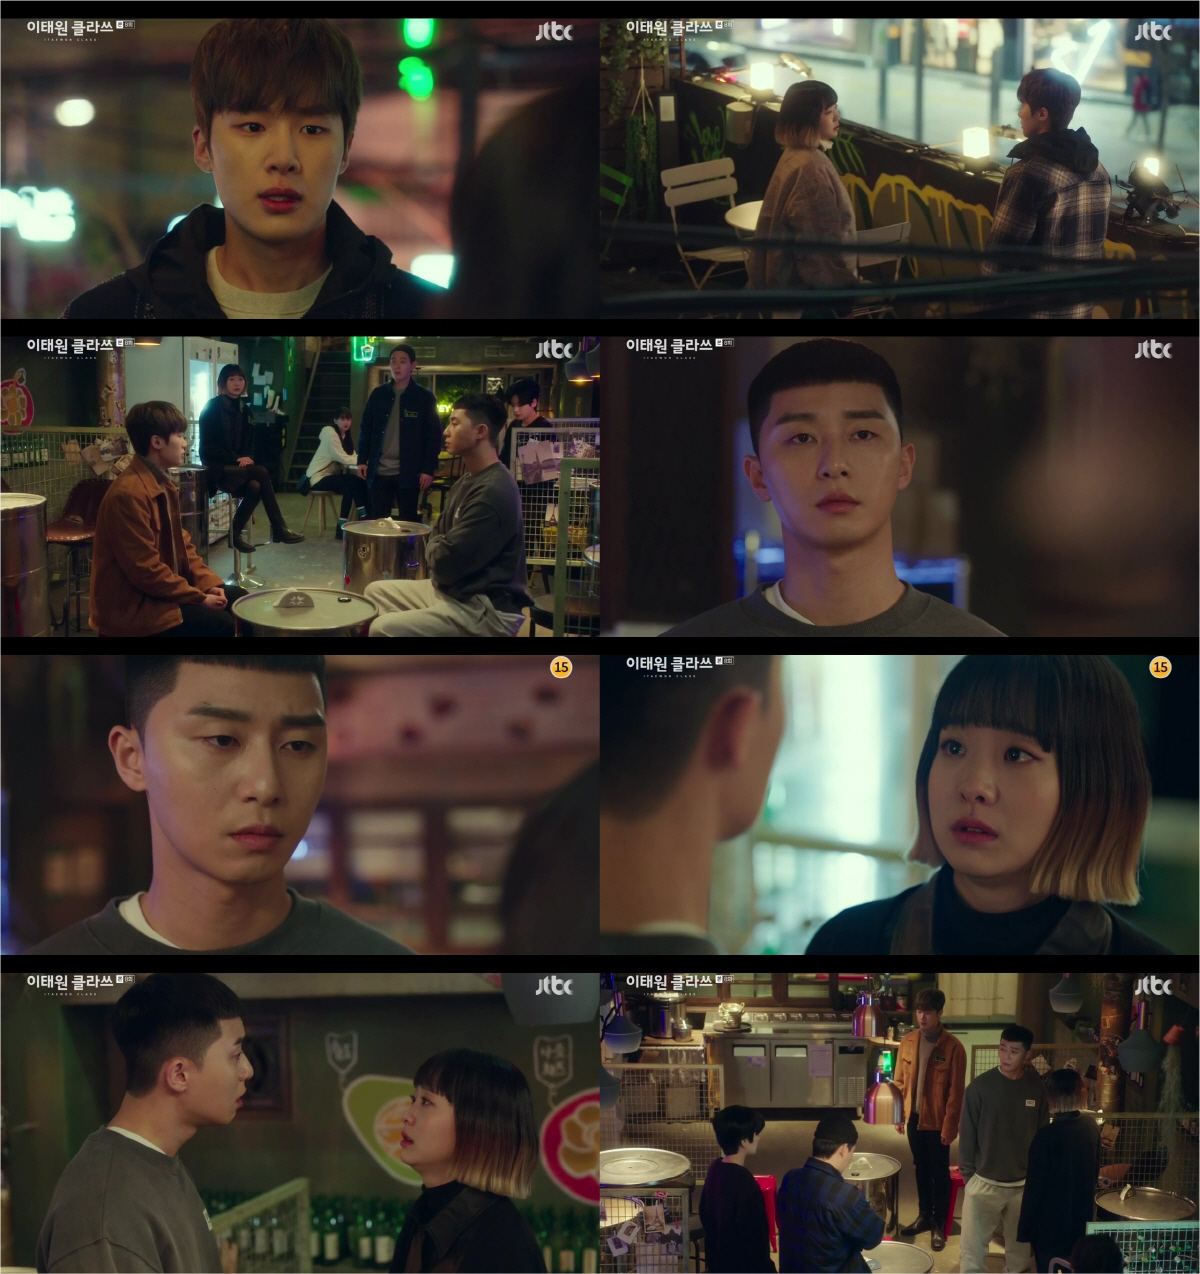 Itaewon Klath The highest TV viewer ratings per minute soared to 15.4% and continued the hot wind.JTBC gilt drama Itaewon Clath (directed by Kim Sung-yoon, playwright Cho Kwang-jin, production showbox and writing, original webtoon Itaewon Clath) is showing an unstoppable rise with a terrible momentum.The 8th episode, which was broadcast on the 22nd, recorded 12.6% nationwide and 14.0% in the Seoul metropolitan area (Nilson Korea, based on paid households), and kept the top spot in the same time zone for the eighth consecutive time.This is the second place in the JTBC drama TV viewer ratings following SKY Castle, and attention is focused on Itaewon Clath syndrome.The confrontation between Park Seo-joon and Jang Dae-hee (Yoo Jae-myung), who continue the counterattack, made tensions impossible and set the audiences mind on fire.The best minute, which soared to 15.4 percent of TV viewer ratings per minute, was Knotweed water (Kim Dong-hee), who decided to leave the night, and scenes of Park Sa-ro and Joe-yol Lee (Kim Da-mi), who exploded in conflict.Changs counterattack to kneel Roy was more than I imagined; he bought the Foa building at night, and Roy and his staff were on the verge of being kicked out overnight.Knotweed water, who learned all about the bad news of Park and Jangga Group, and its past history (), decided to leave Foa at night.He decided that it was the best he could do for Roy and the night that he would return to the house and return the situation to the original state.But unlike the reflex Joe-yool Lee, Roy caught him and set fire to the conflict between the two.The two men, Park Sae and Chang, who visited the Janga group, were in a fiery confrontation, and Chang was not even able to buy the building, so he threatened to buy a place where Foa opened the door.All he could turn his mind to was that he was kneeling. But Roy said, Retirement, building?You have not taken anything from me. Knowing what his family had done to Roy, Knotweed Water decided to leave Foa at night after agonizing.Instead of going back to the house, I was going to ask my father, Chang, not to touch the night.But as soon as he got out, Roy caught him and took off her name tag, saying, You are not a manager, to Joe-yool Lee.But Joe-yol Lee, who has no choice but to make realistic judgments as a manager, confronted him, saying, I risked my life to the boss, I have to take responsibility, I have a real alternative.So, Roy recovered a billion won in investment and set up a new building in the accounting team to prepare for a new leap in Foa.Chang, who heard about him, once again showed discomfort. But at the end of the broadcast, The power they speak ... man. I did not take anything?, followed by a meaningful self-talk by the chairman, who appeared in front of him, and he turned around.Joe-yool Lees brilliant growth to walk with Park Roy shines, and the head of the chairman who summoned her amplifies her curiosity.On the other hand, Itaewon Clath is broadcast every Friday and Saturday at 10:50 JTBC.